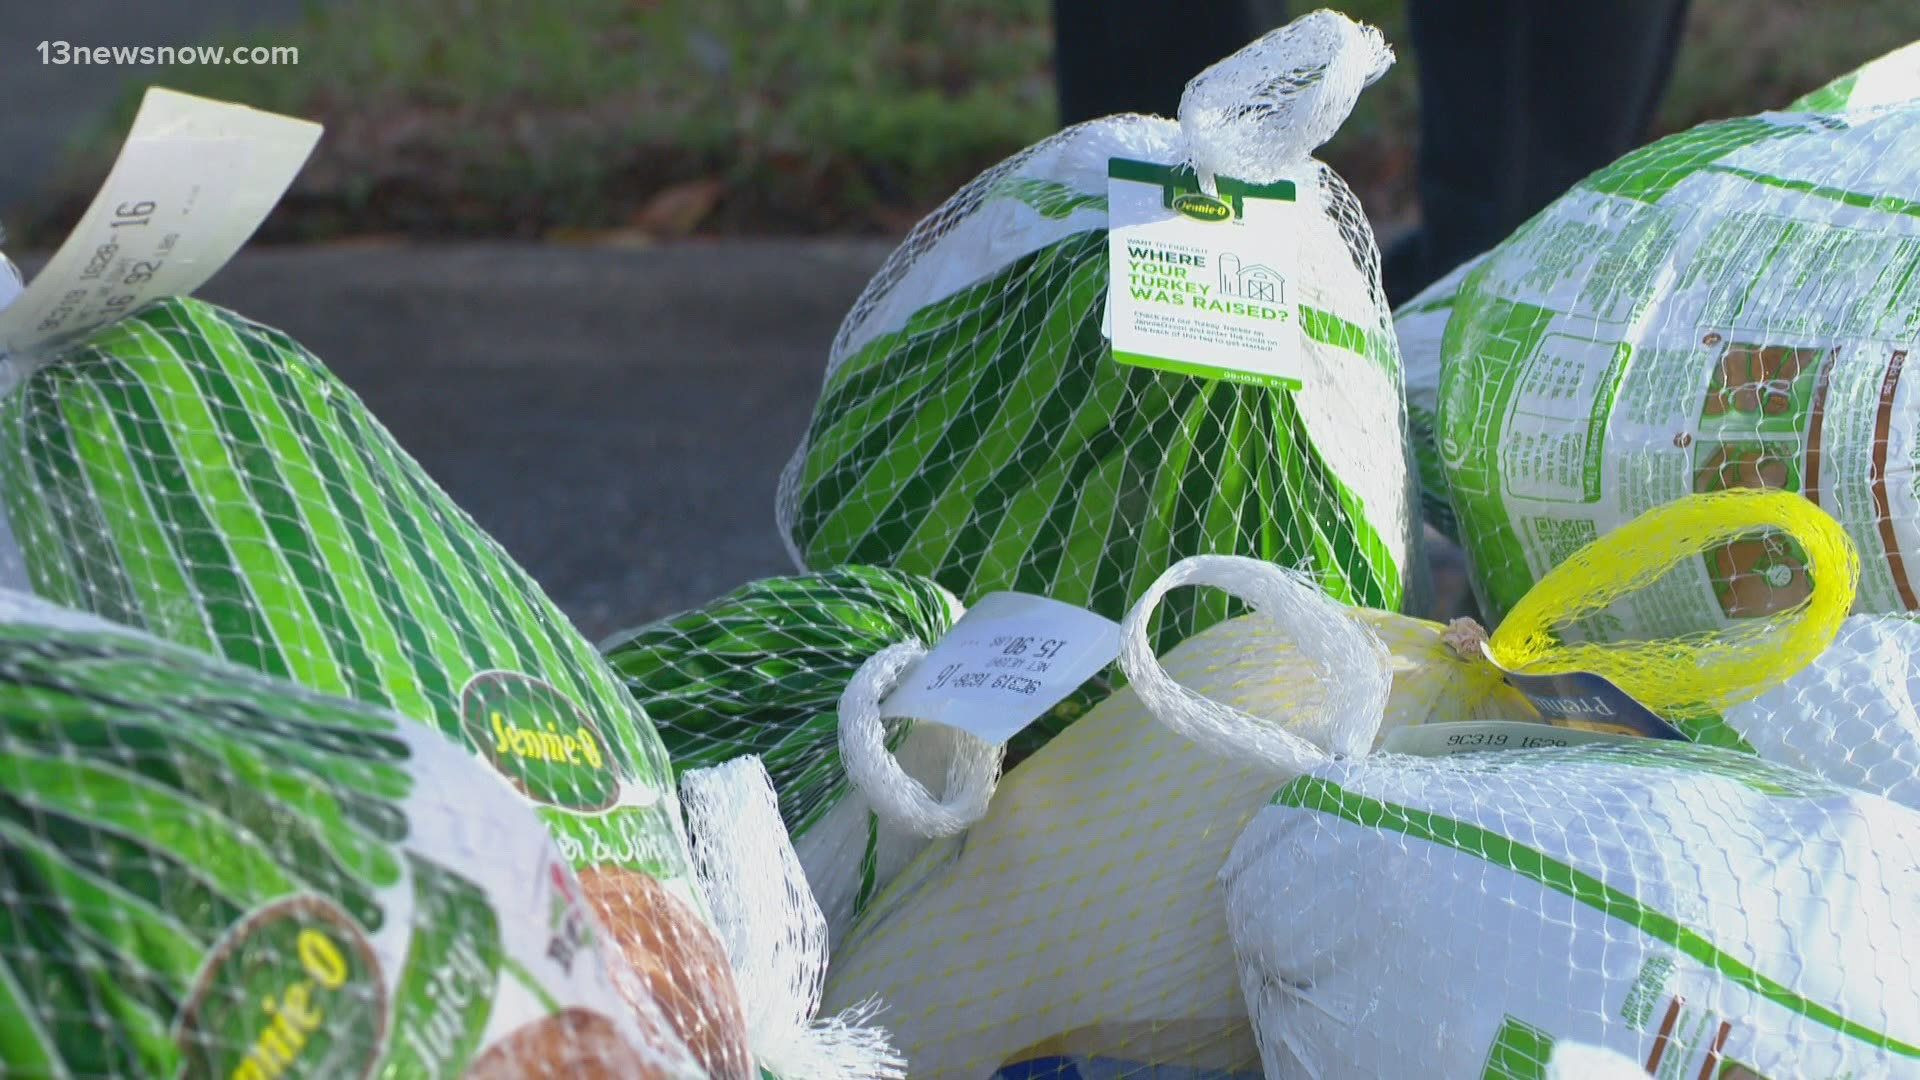 13News Now Dana Smith went to a food drive at First Church of Newport News (Baptist) where they plan to donate 200 turkeys to community members.